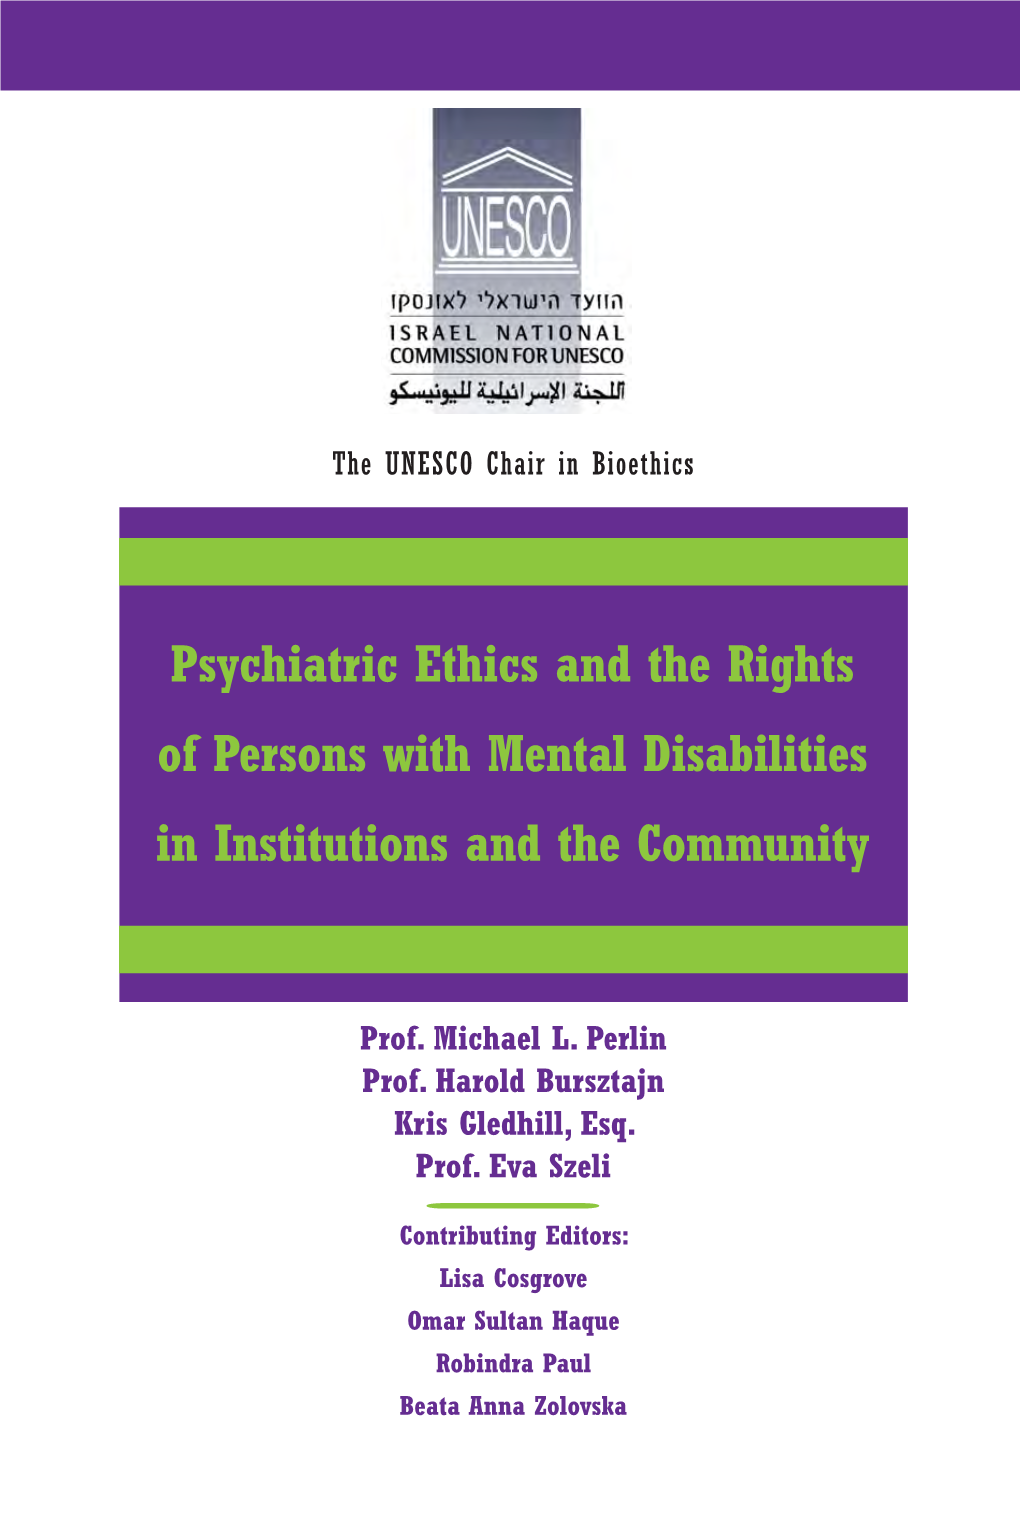 Psychiatric Ethics and the Rights of Persons with Mental Disabilities in Institutions and the Community